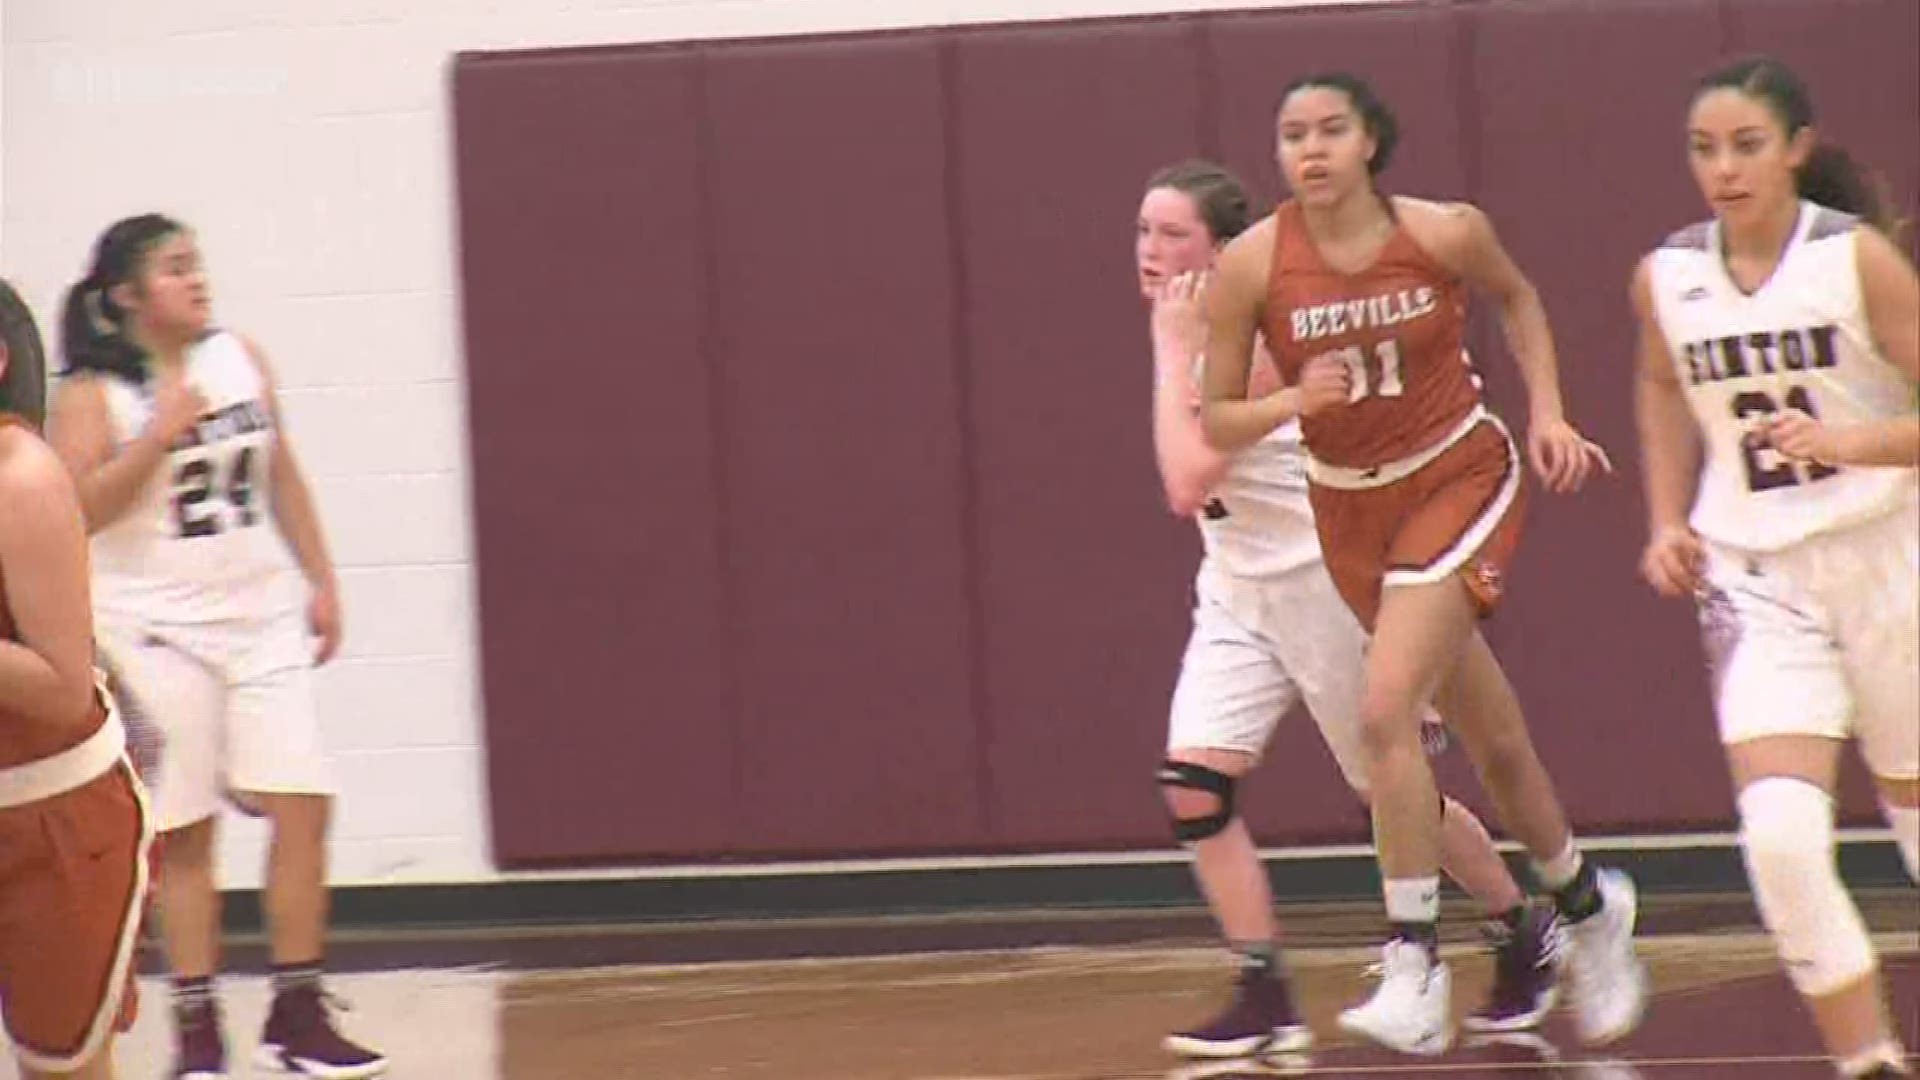 Gipson has set the Beeville Lady Trojans' single game scoring record three separate times this season including a 50 point game against Kingsville.